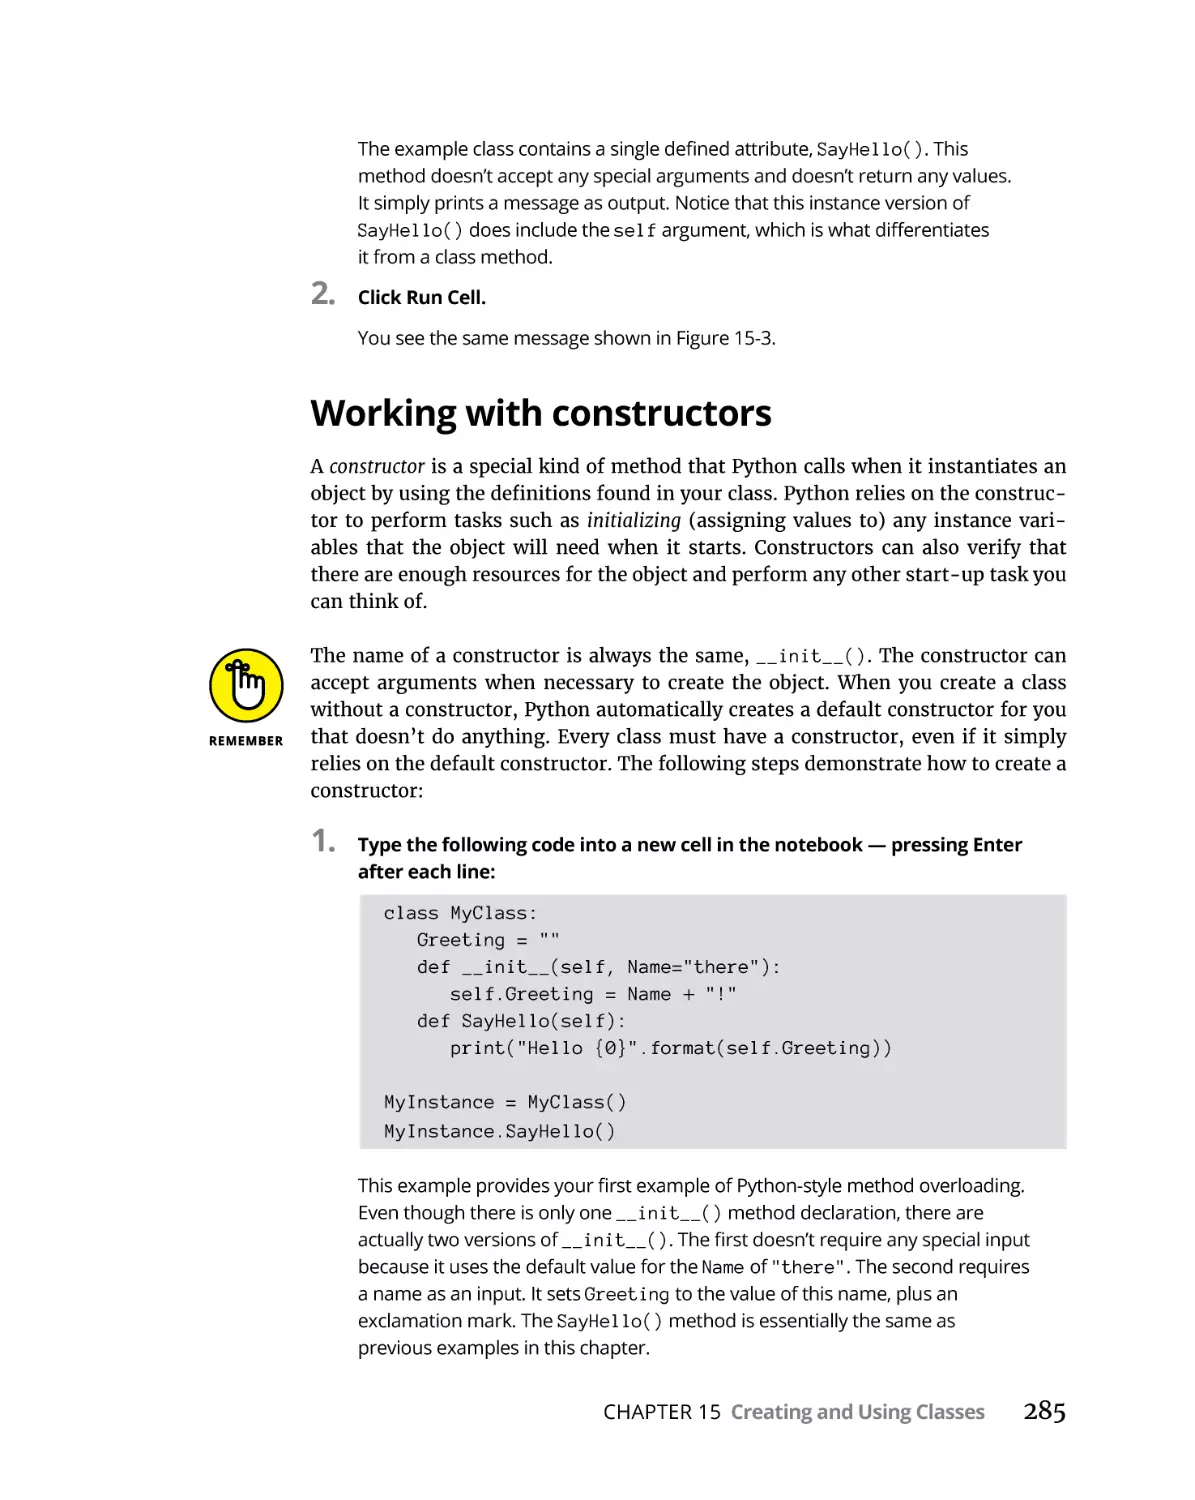 Working with constructors